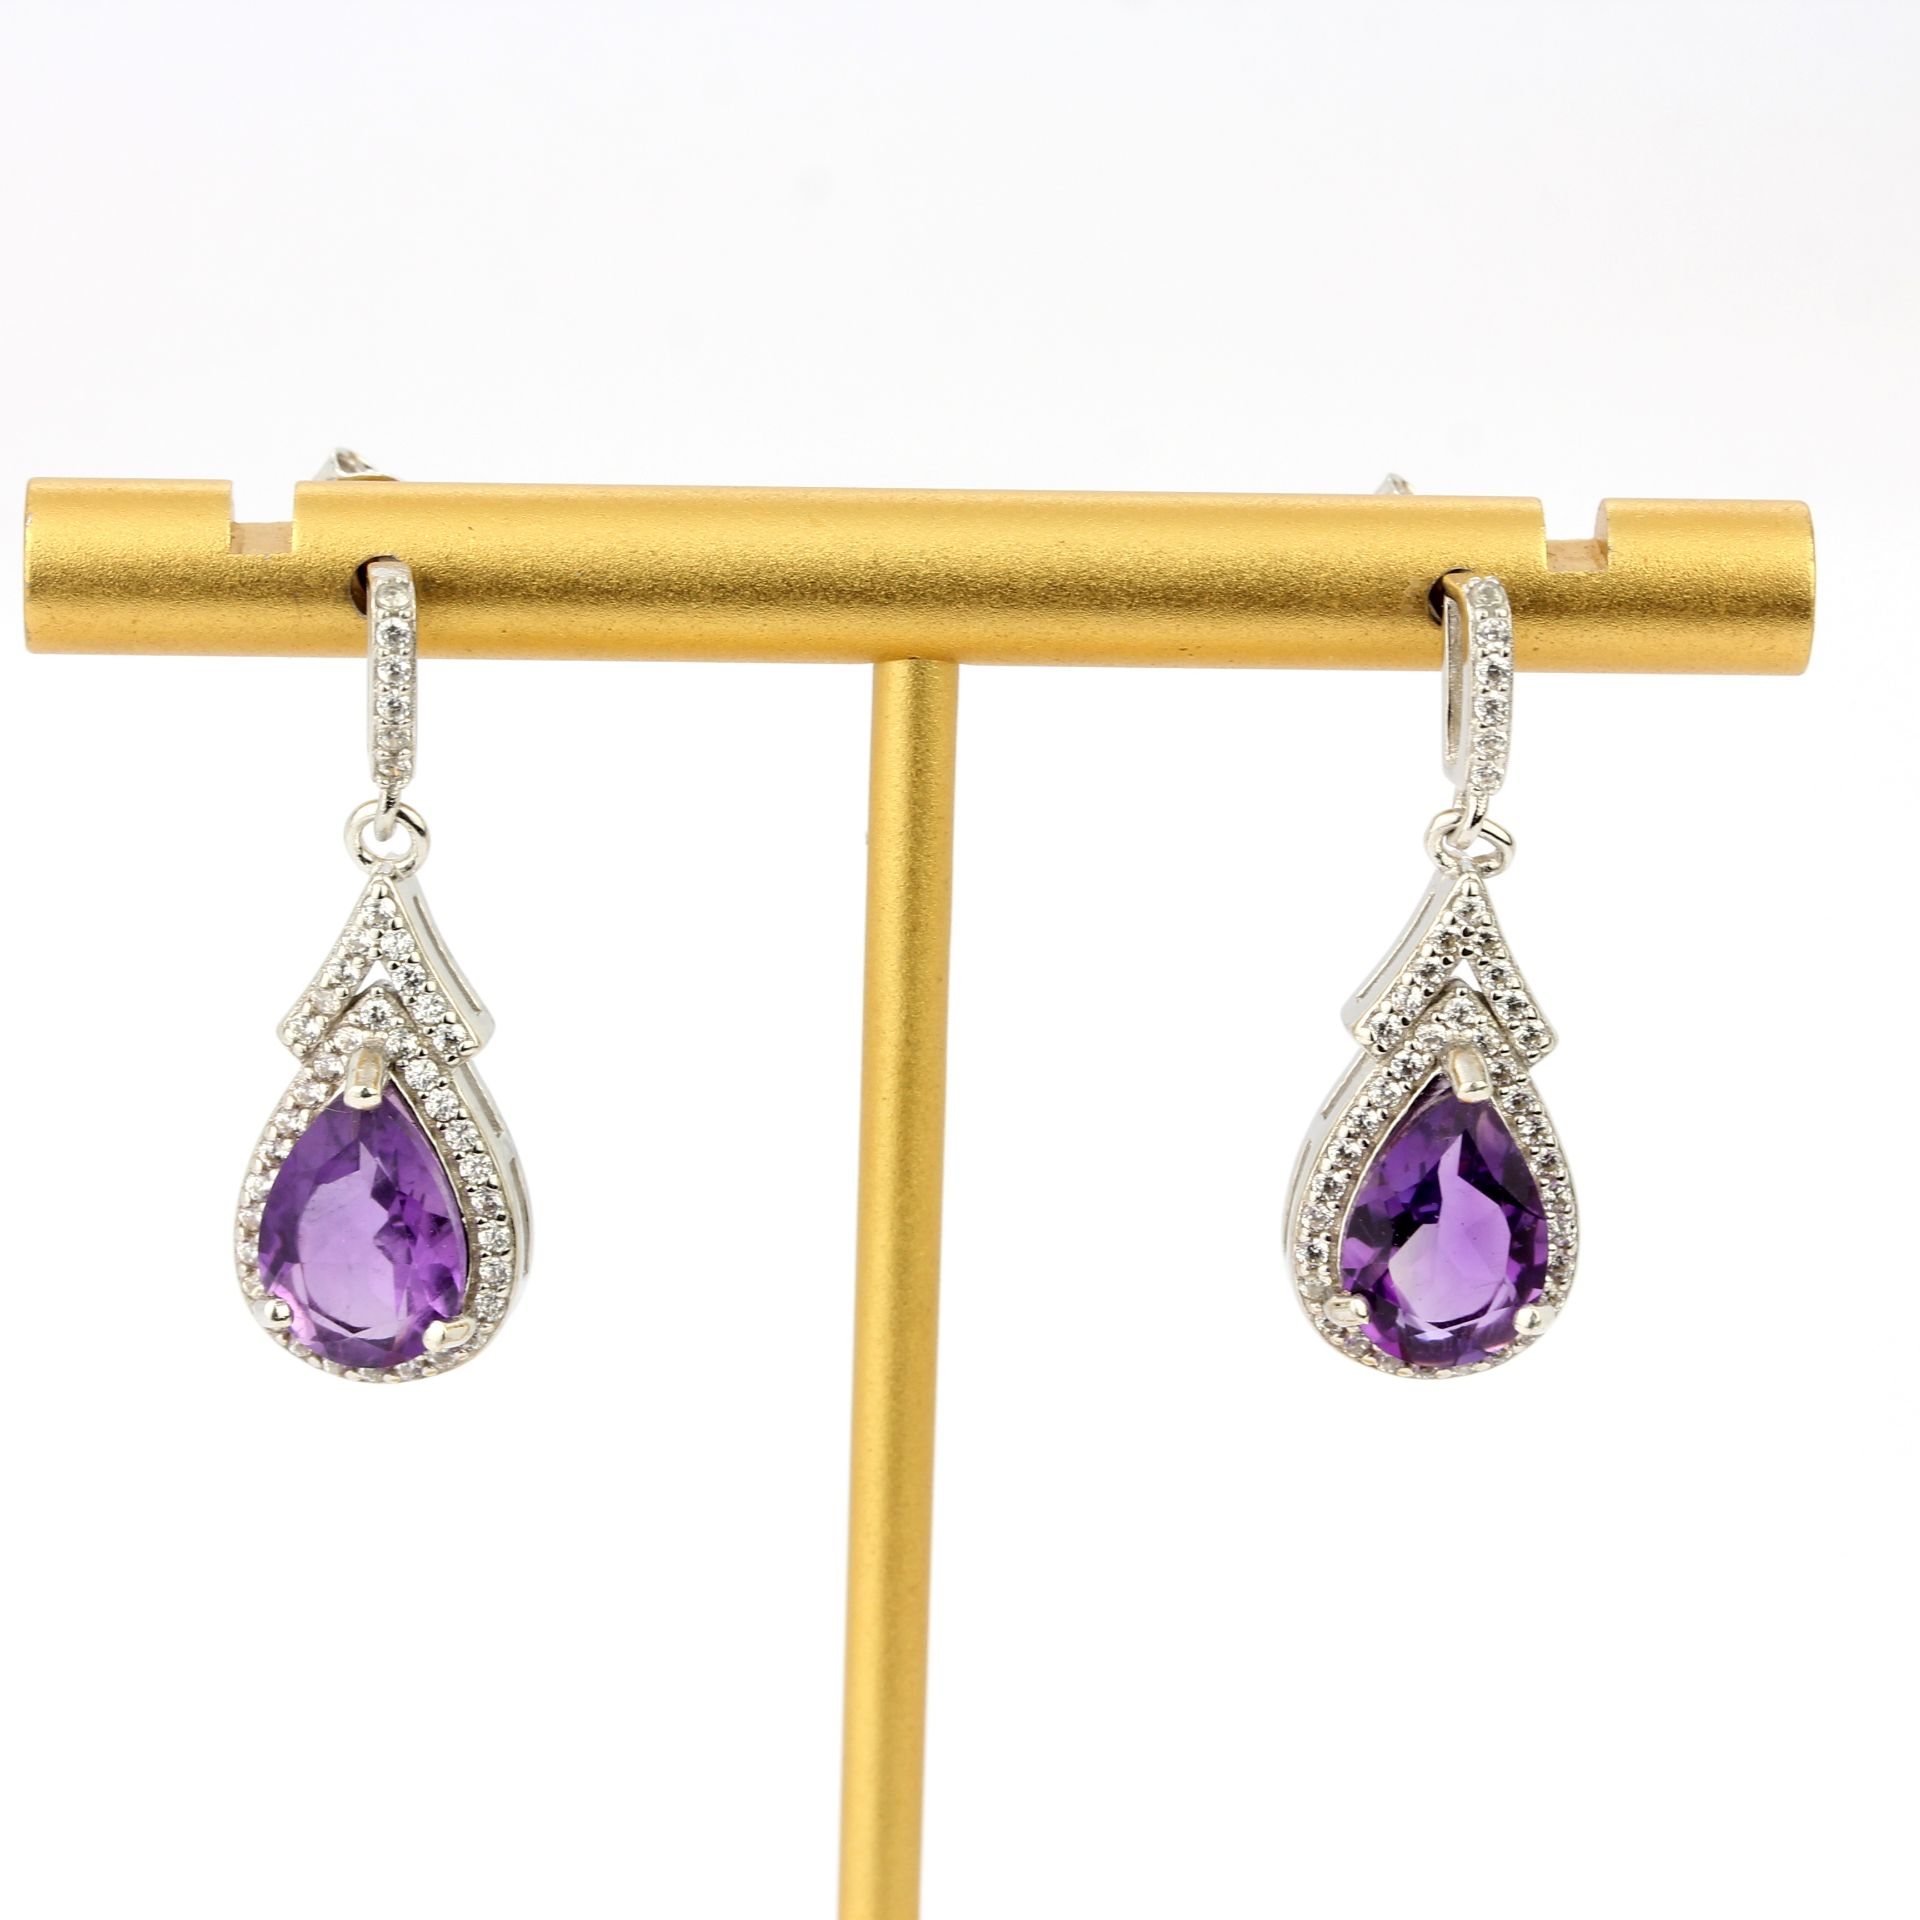 A pair of 925 silver drop earrings set with pear cut amethysts and white stones, L. 2.8cm.